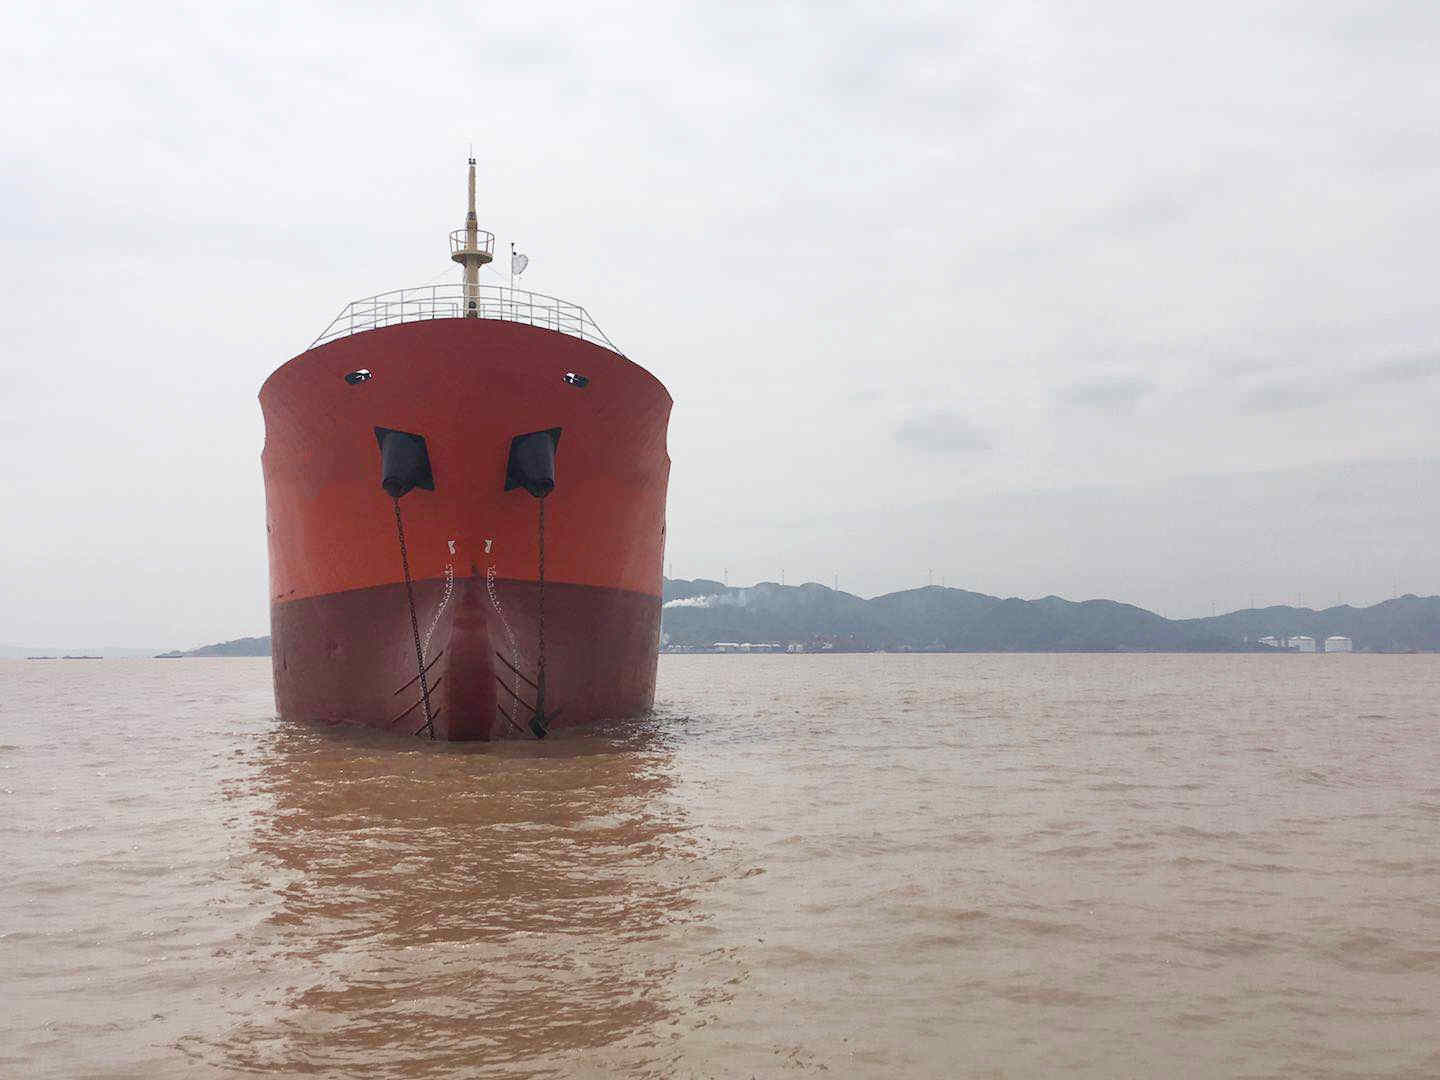 7099 T Product Oil Tanker For Sale